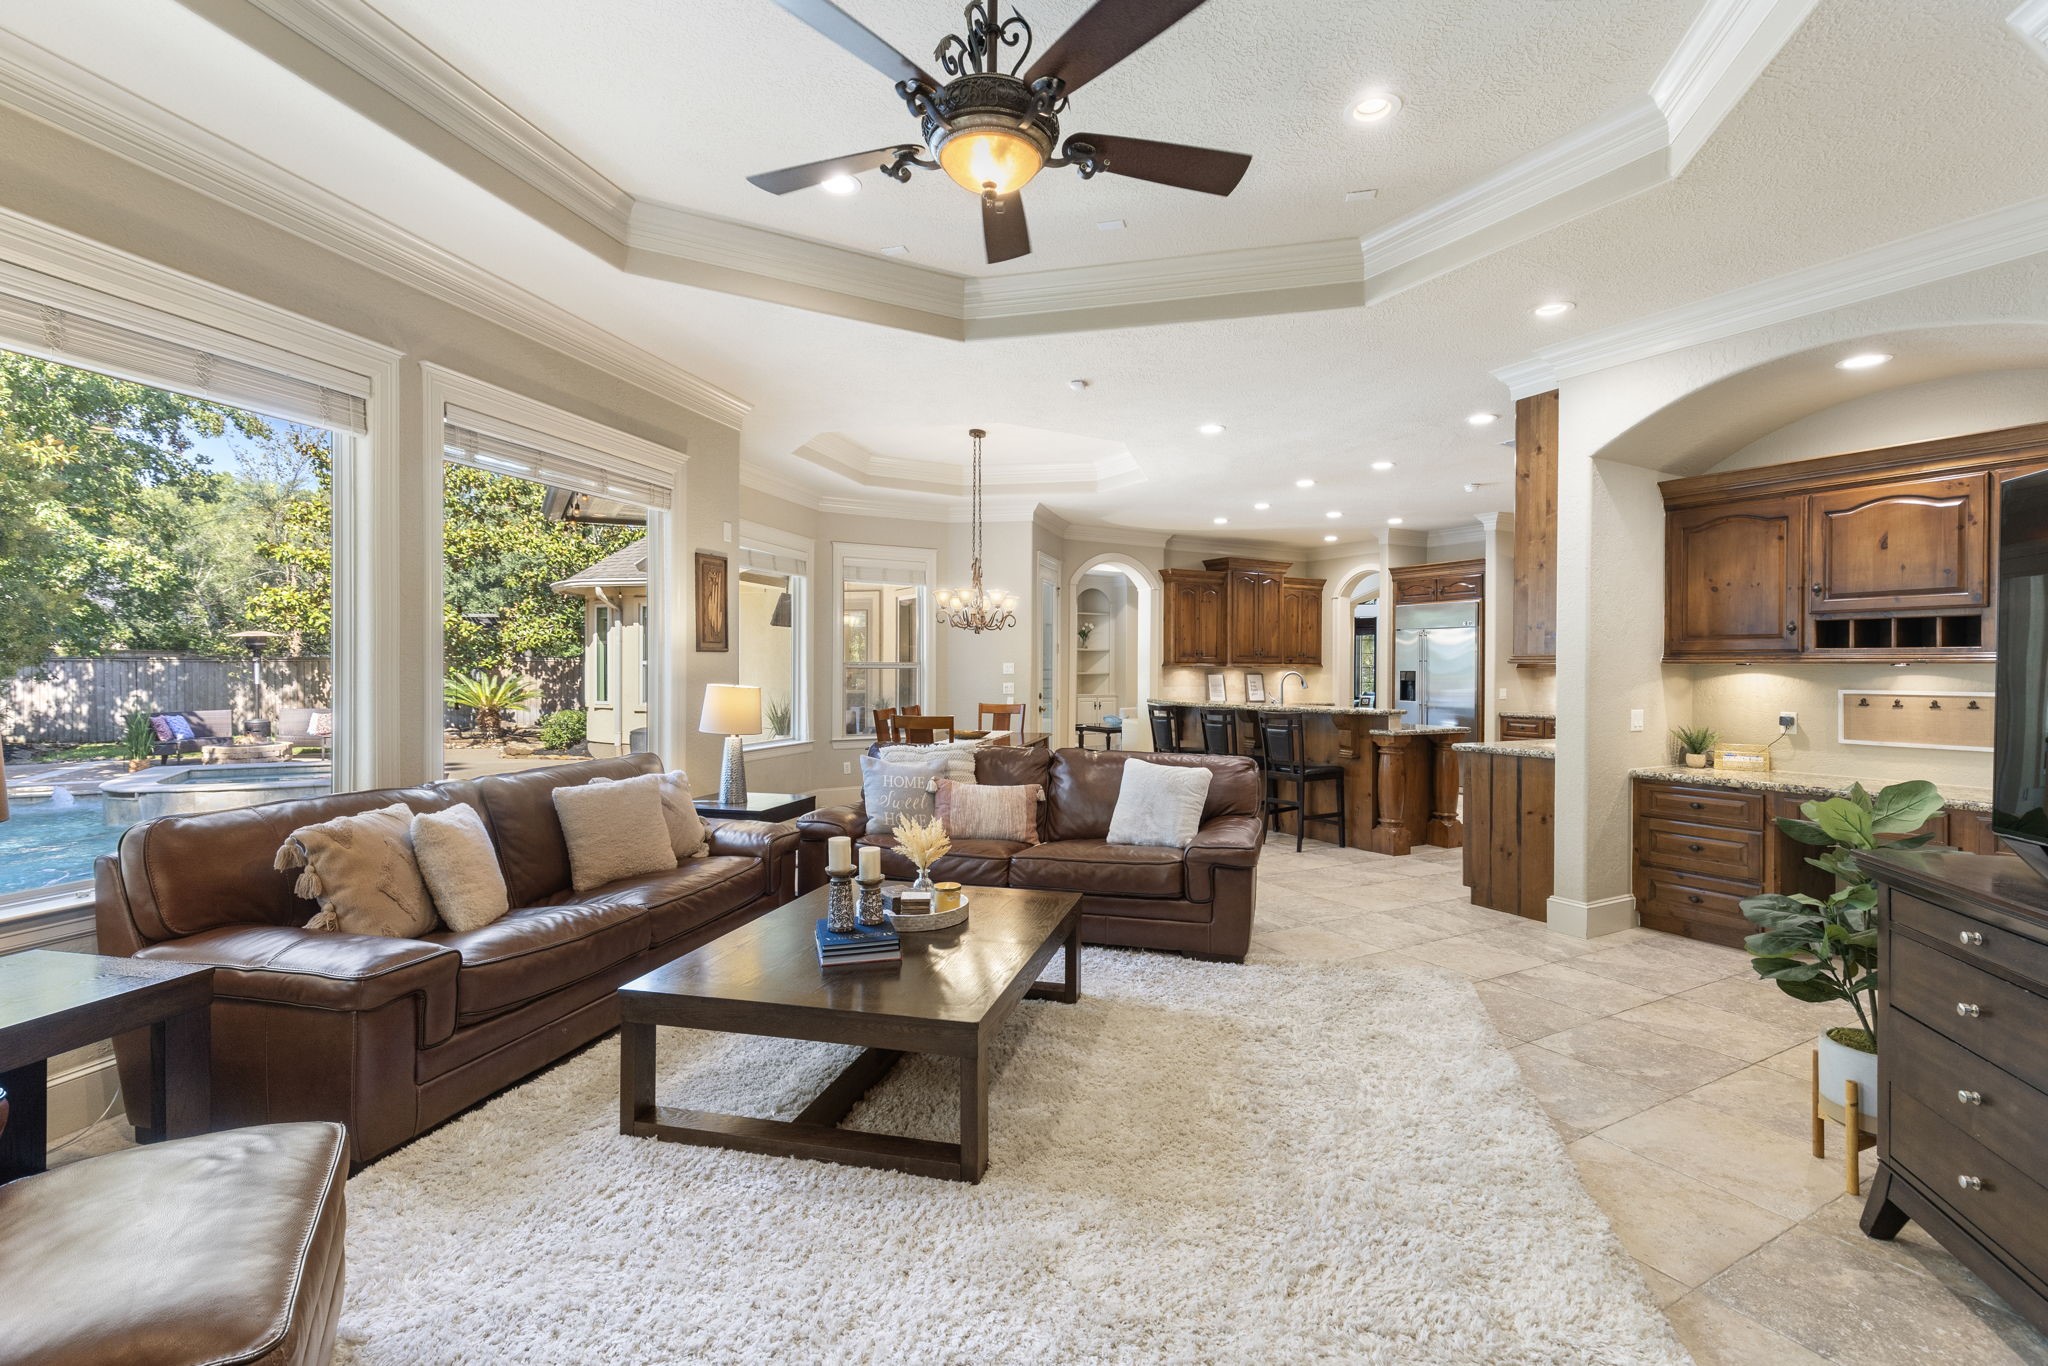 This view provides a look at the open concept floorplan to the breakfast nook and gourmet kitchen - perfect for entertaining and spending time with family and friends.  New energy efficient LED lighting installed through the home is August of 2023.